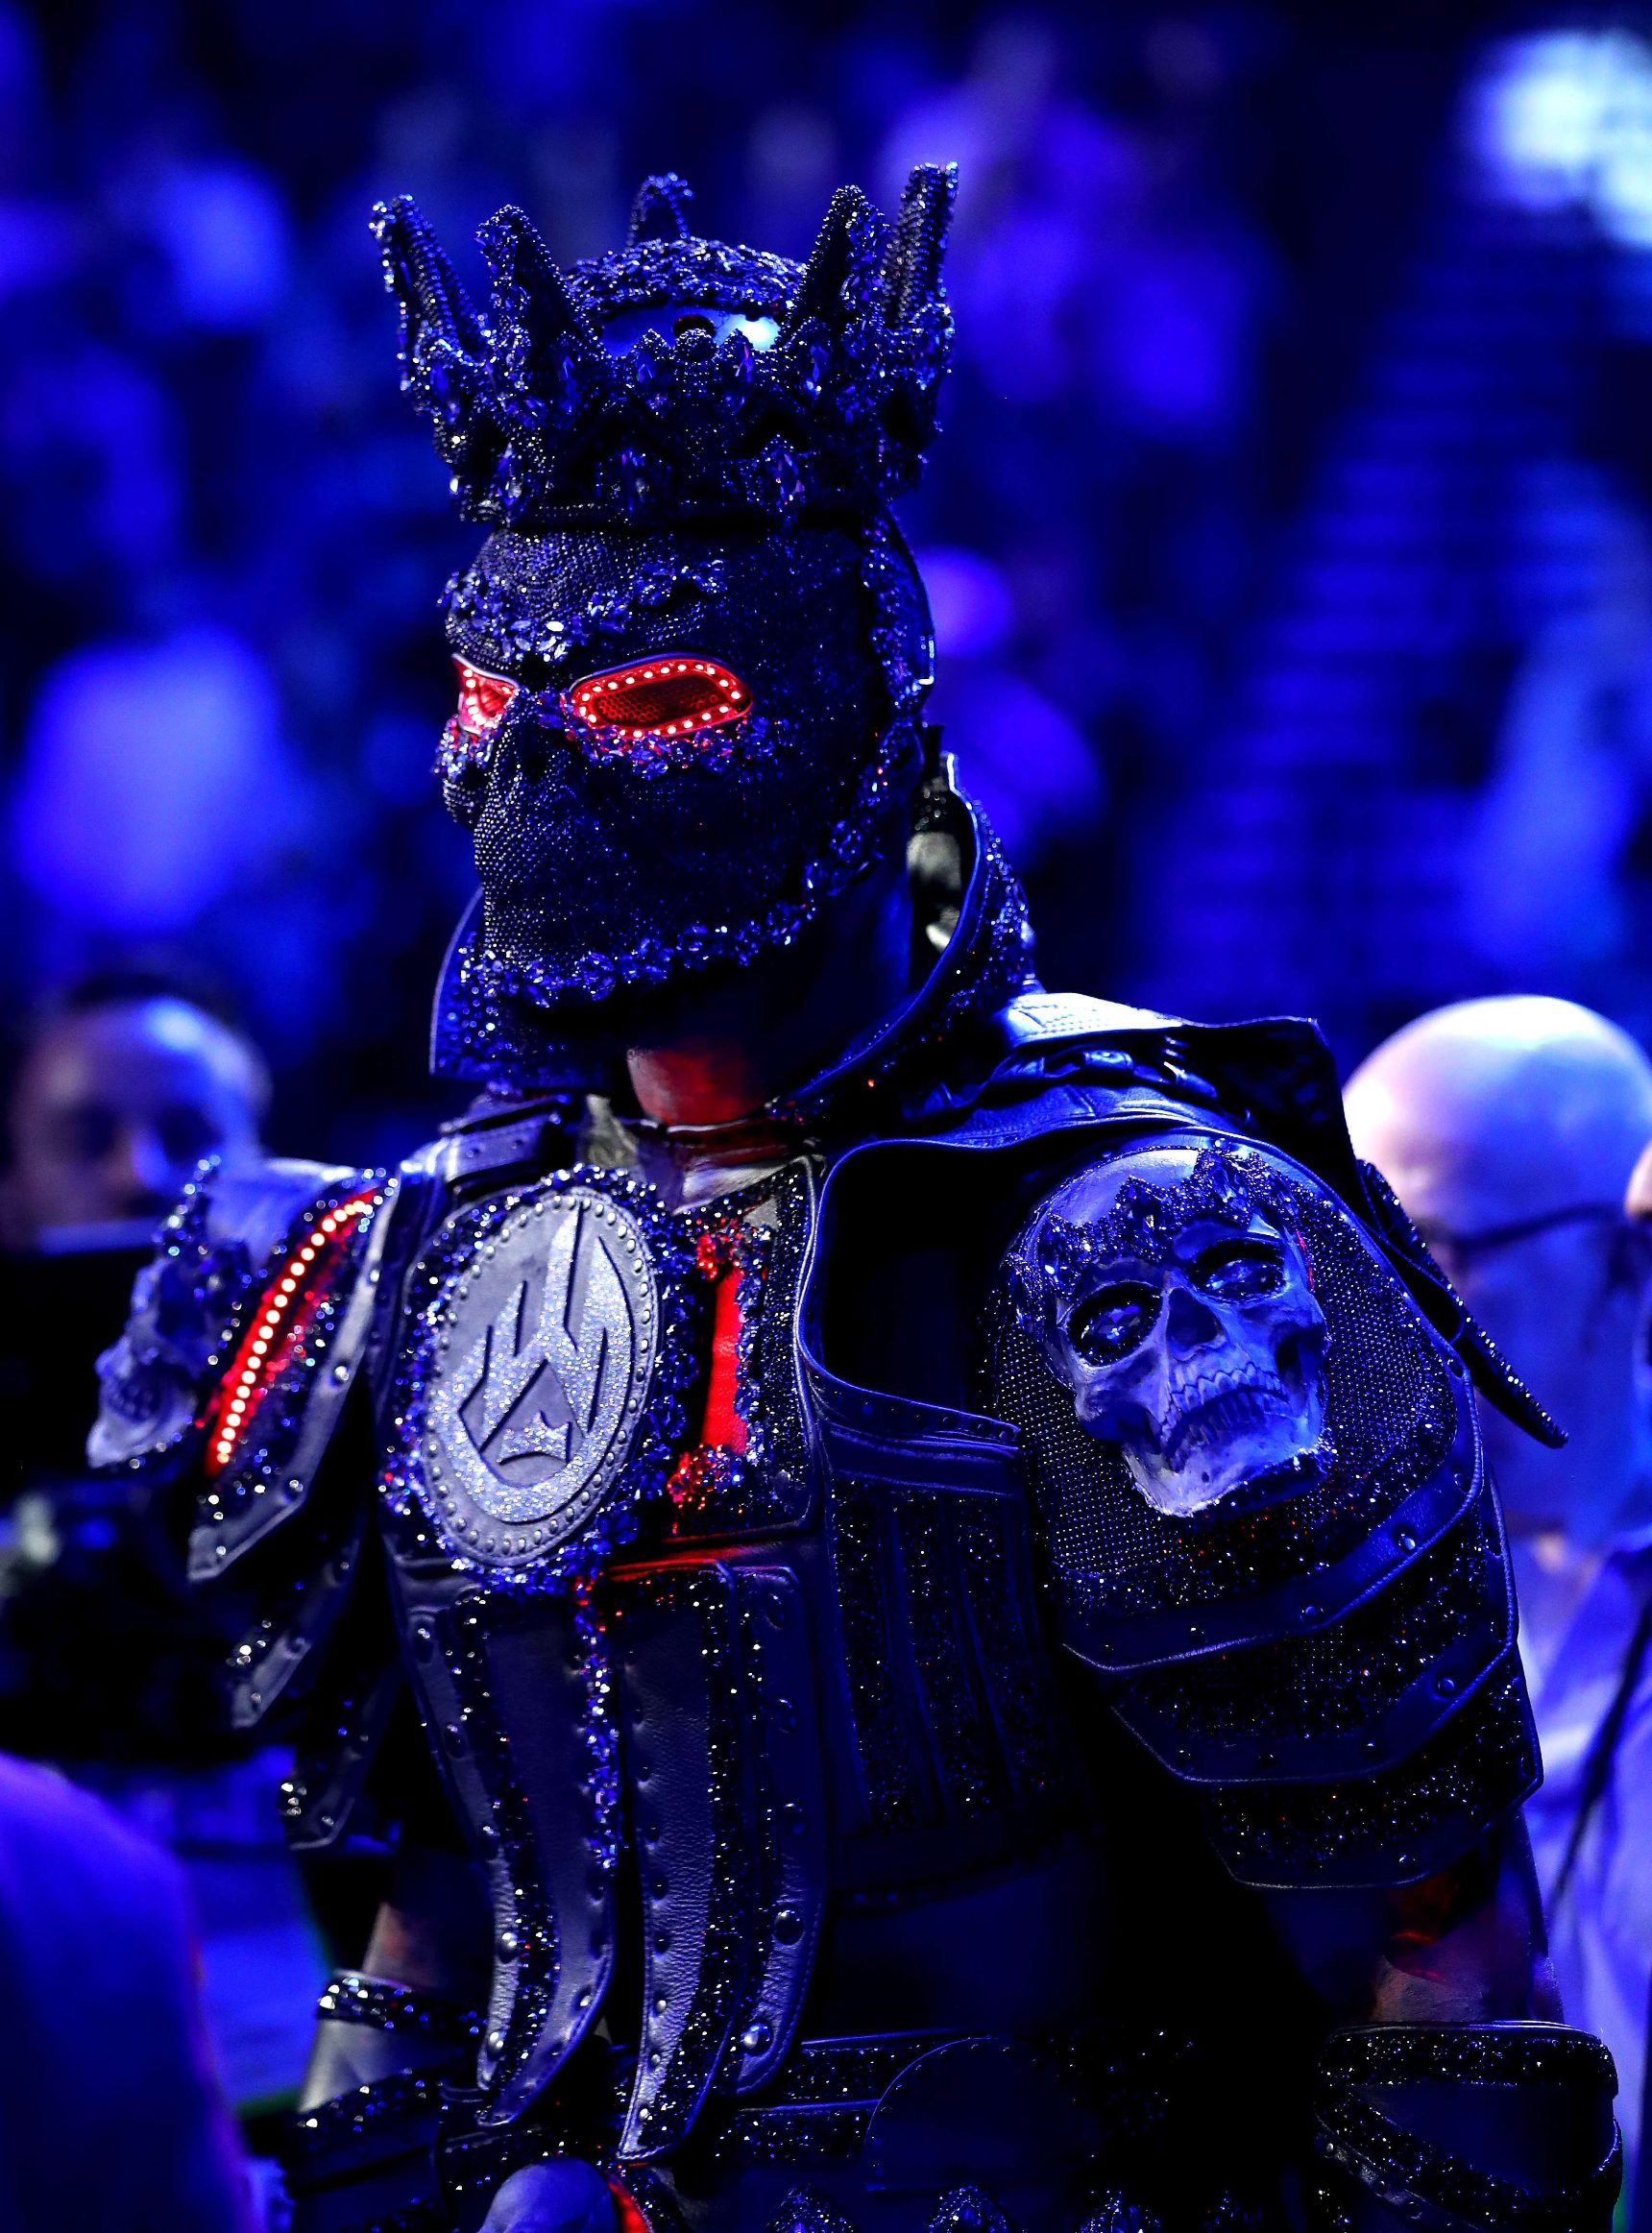 LAS VEGAS, NEVADA - FEBRUARY 22: Deontay Wilder enters the ring prior to the Heavyweight bout for Wilder's WBC and Fury's lineal heavyweight title against Tyson Fury on February 22, 2020 at MGM Grand Garden Arena in Las Vegas, Nevada.   Al Bello/Getty Images/AFP
== FOR NEWSPAPERS, INTERNET, TELCOS & TELEVISION USE ONLY ==